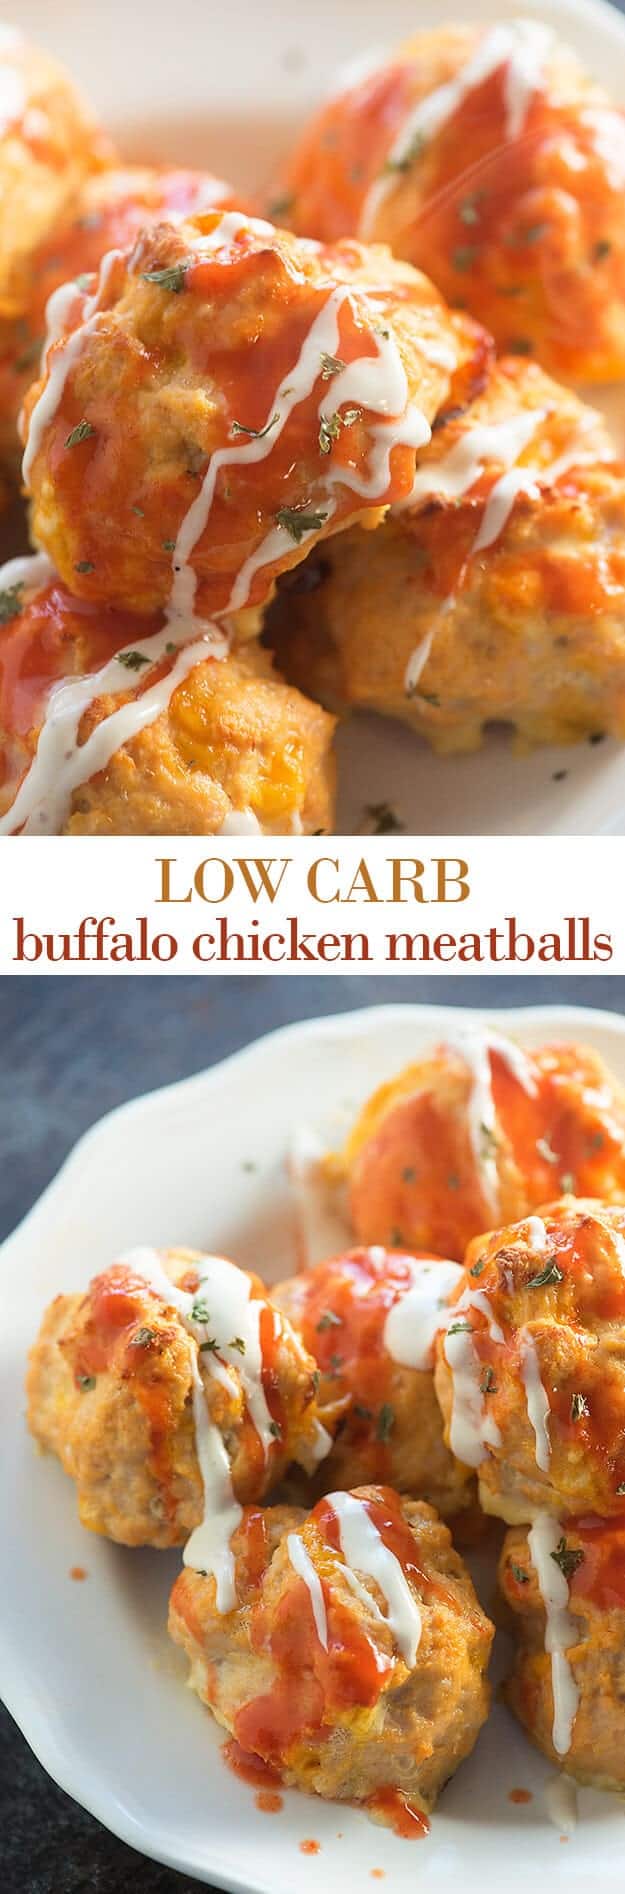 Low Carb Gluten Free Buffalo Chicken Meatballs by Buns in My Oven | Favorite Low Carb Recipes